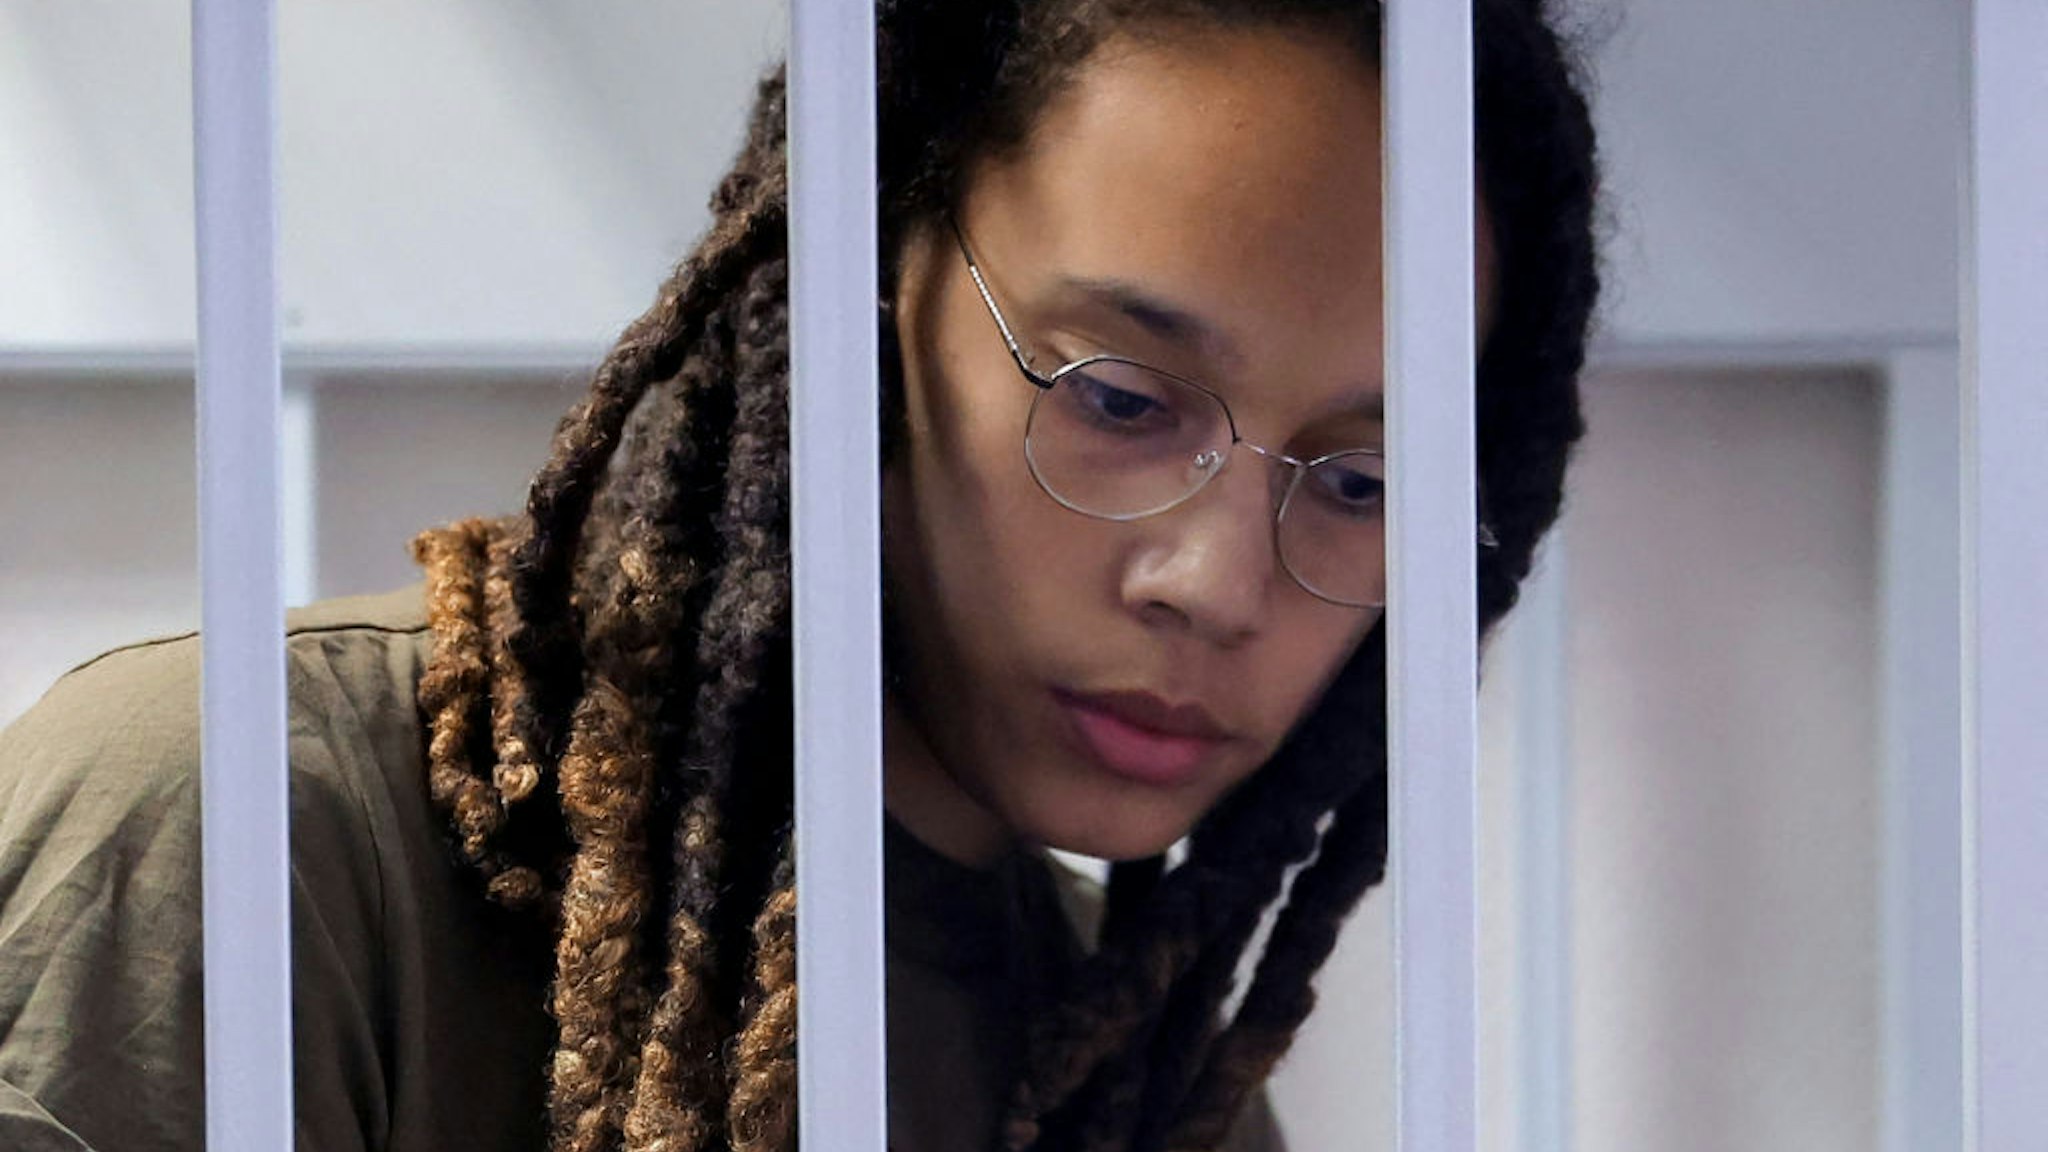 US basketball player Brittney Griner stands in a defendants' cage before a court hearing during her trial on charges of drug smuggling, in Khimki, outside Moscow on August 2, 2022